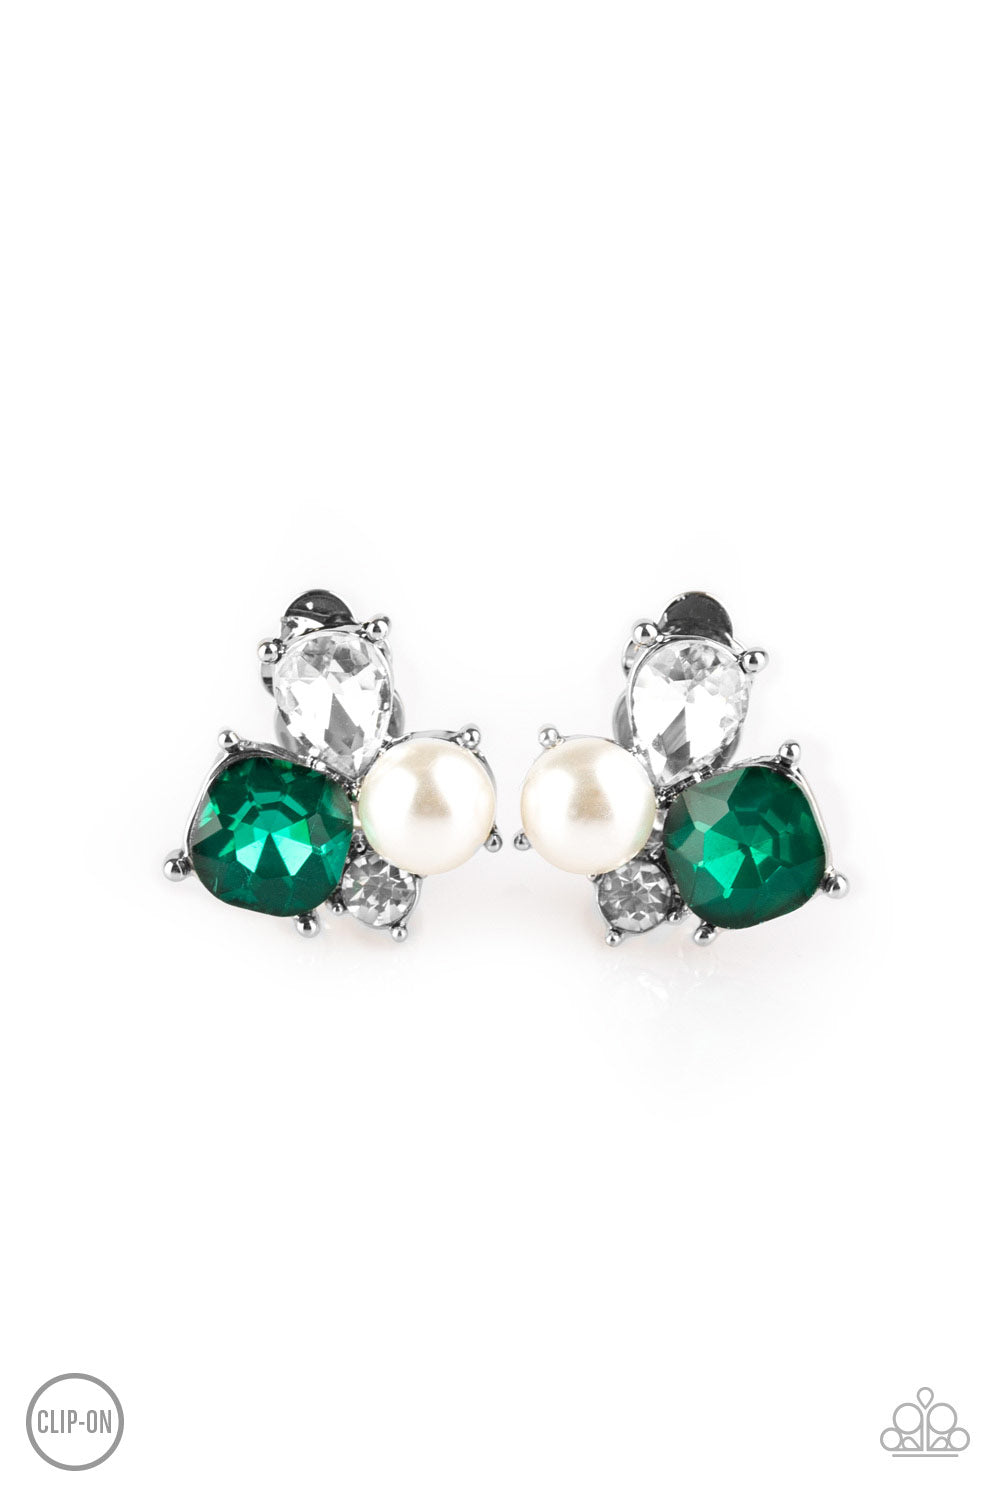 Highly High-Class Green Clip-On Earring - Paparazzi Accessories  Featuring a classic pearl, mismatched green and white rhinestones join into a radiant frame. Earring attaches to a standard clip-on fitting. All Paparazzi Accessories are lead free and nickel free!  Sold as one pair of clip-on earrings.